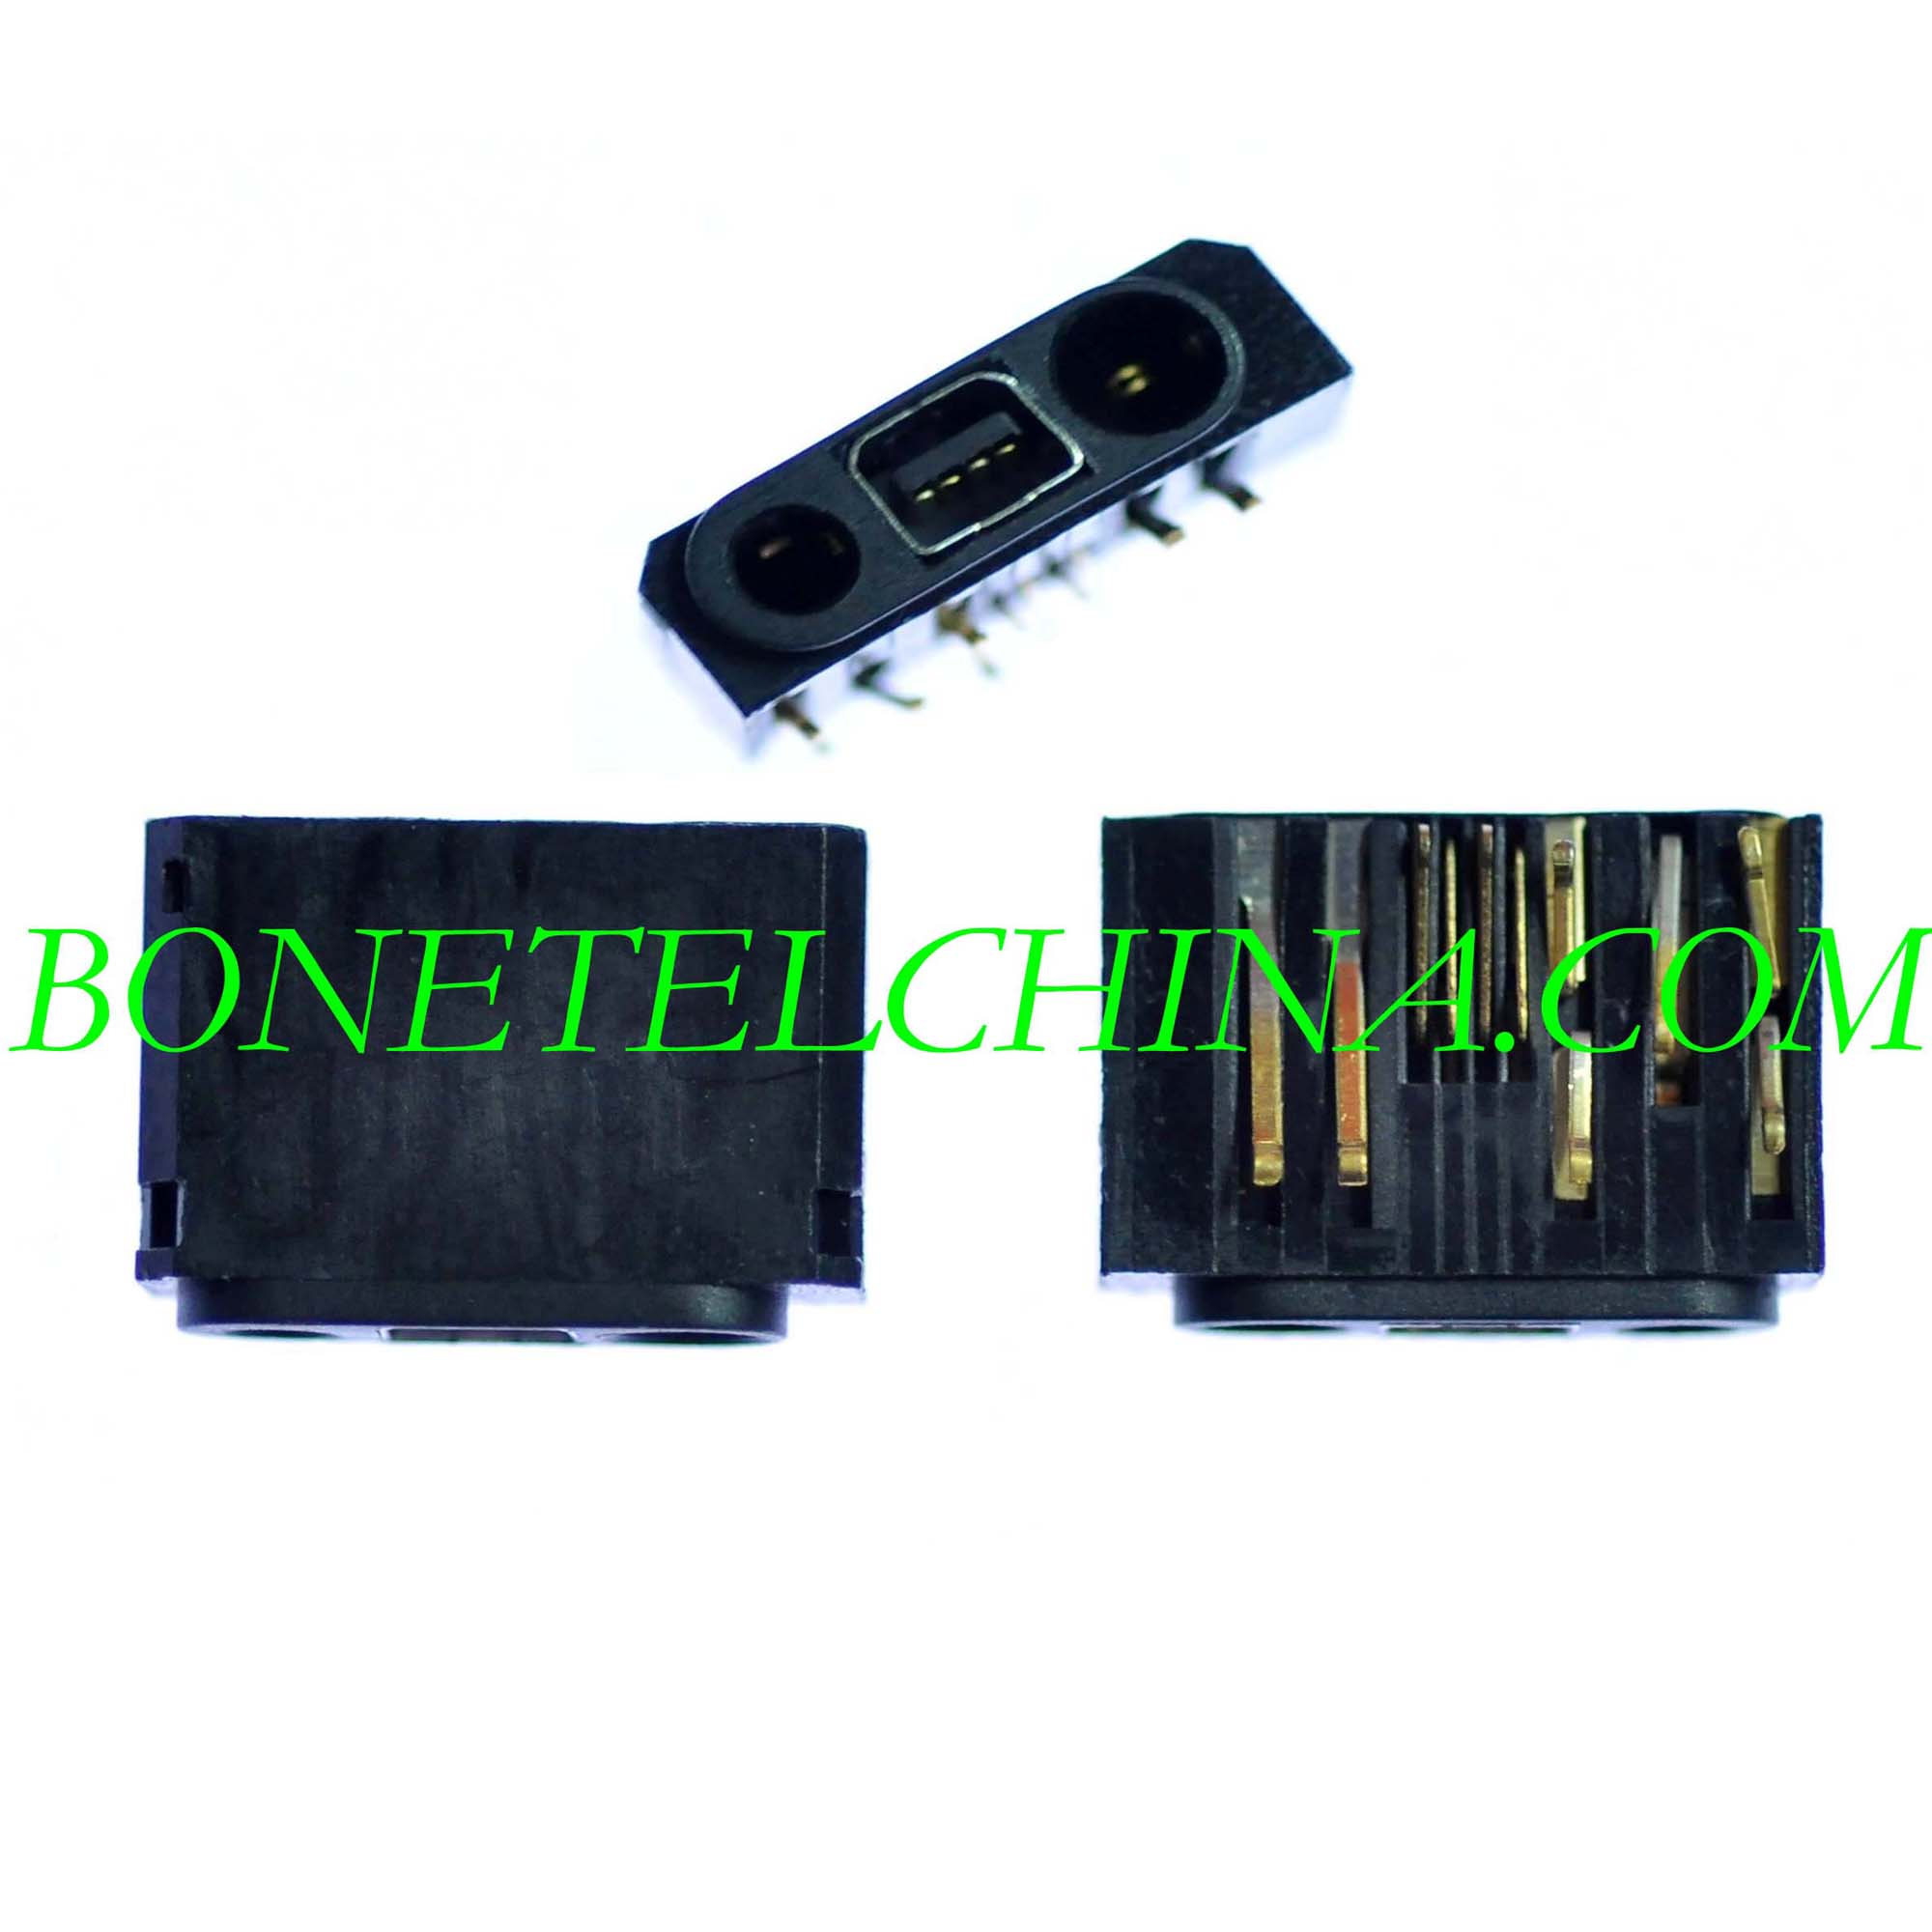 Charger Connector for Nokia 1110, 1112, 1600, 2310, 6030, 2300